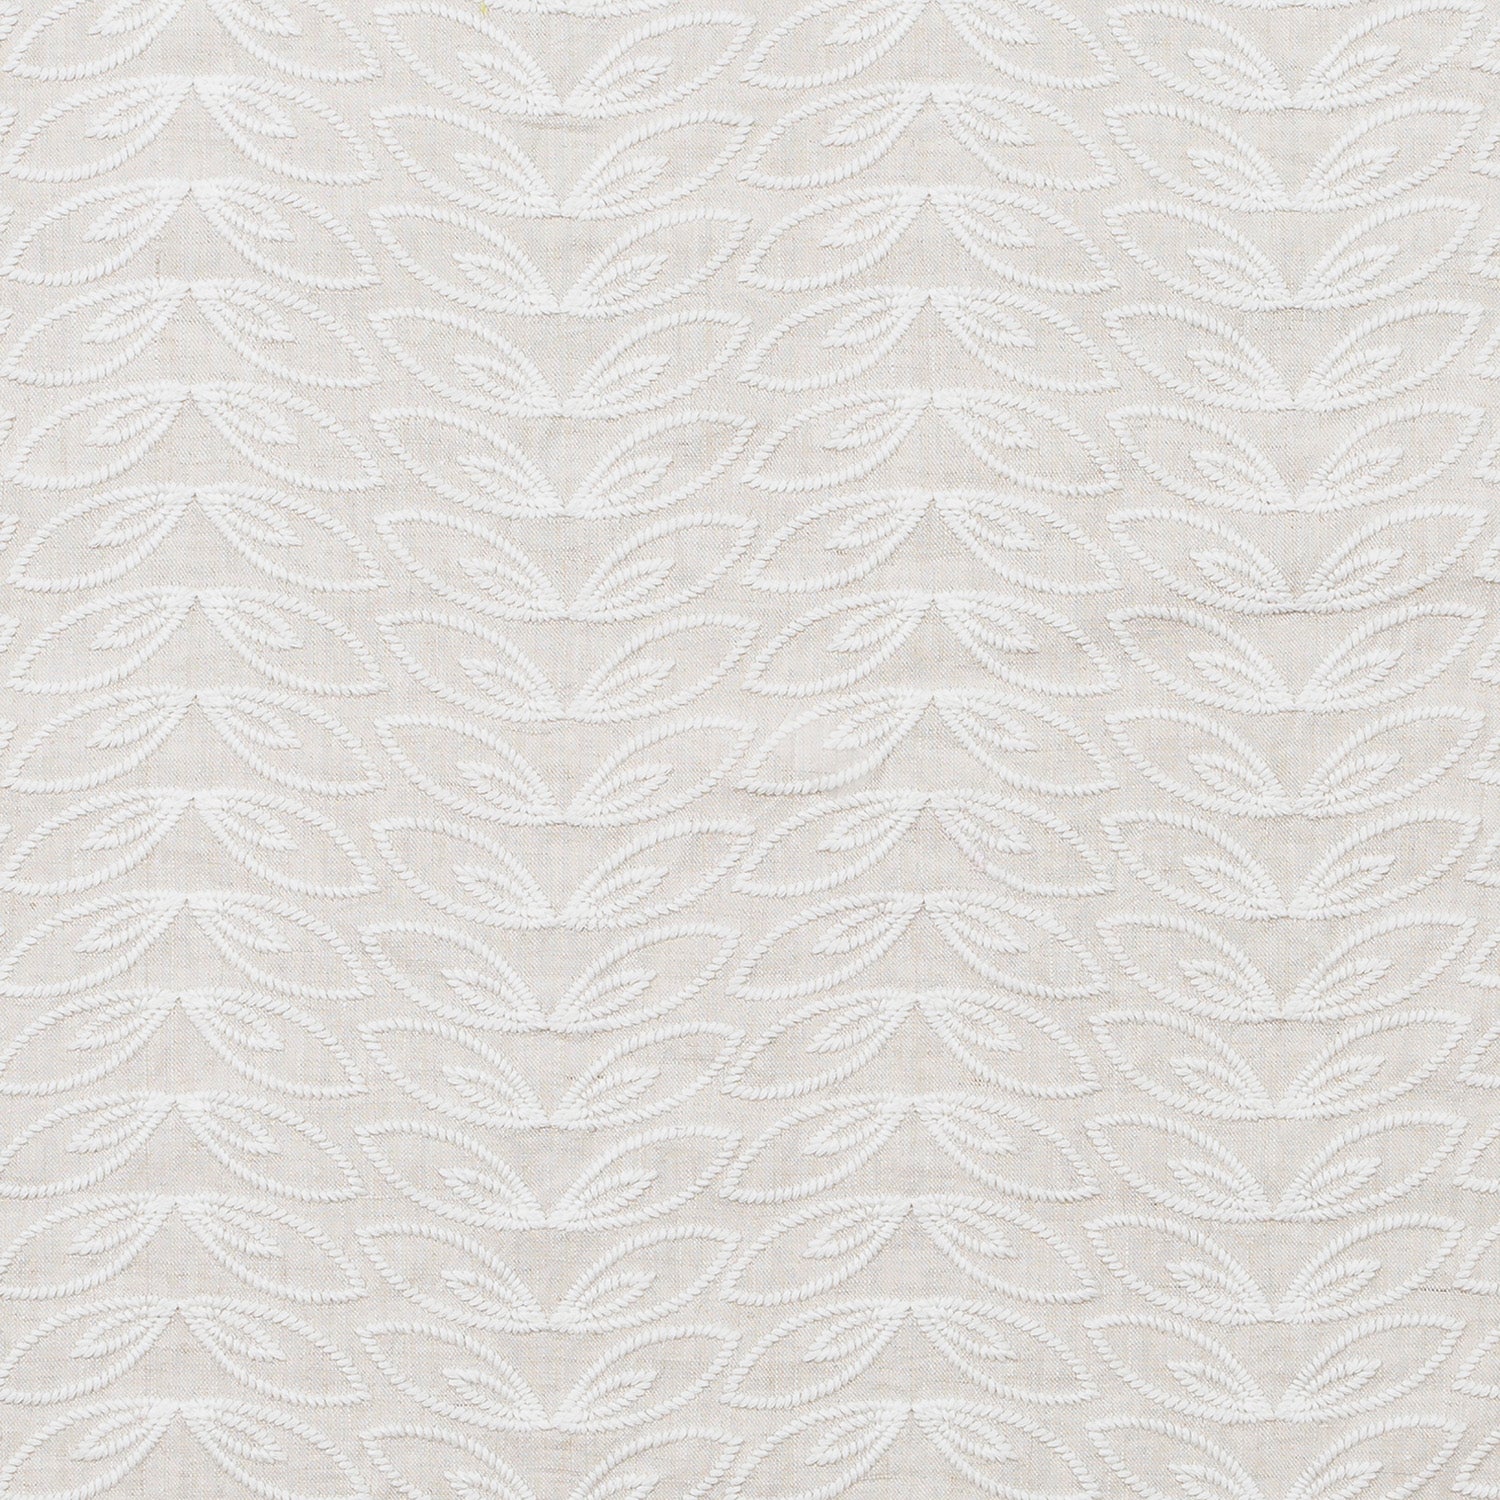 Fabric with an embroidered linear leaf print in white on a white field.